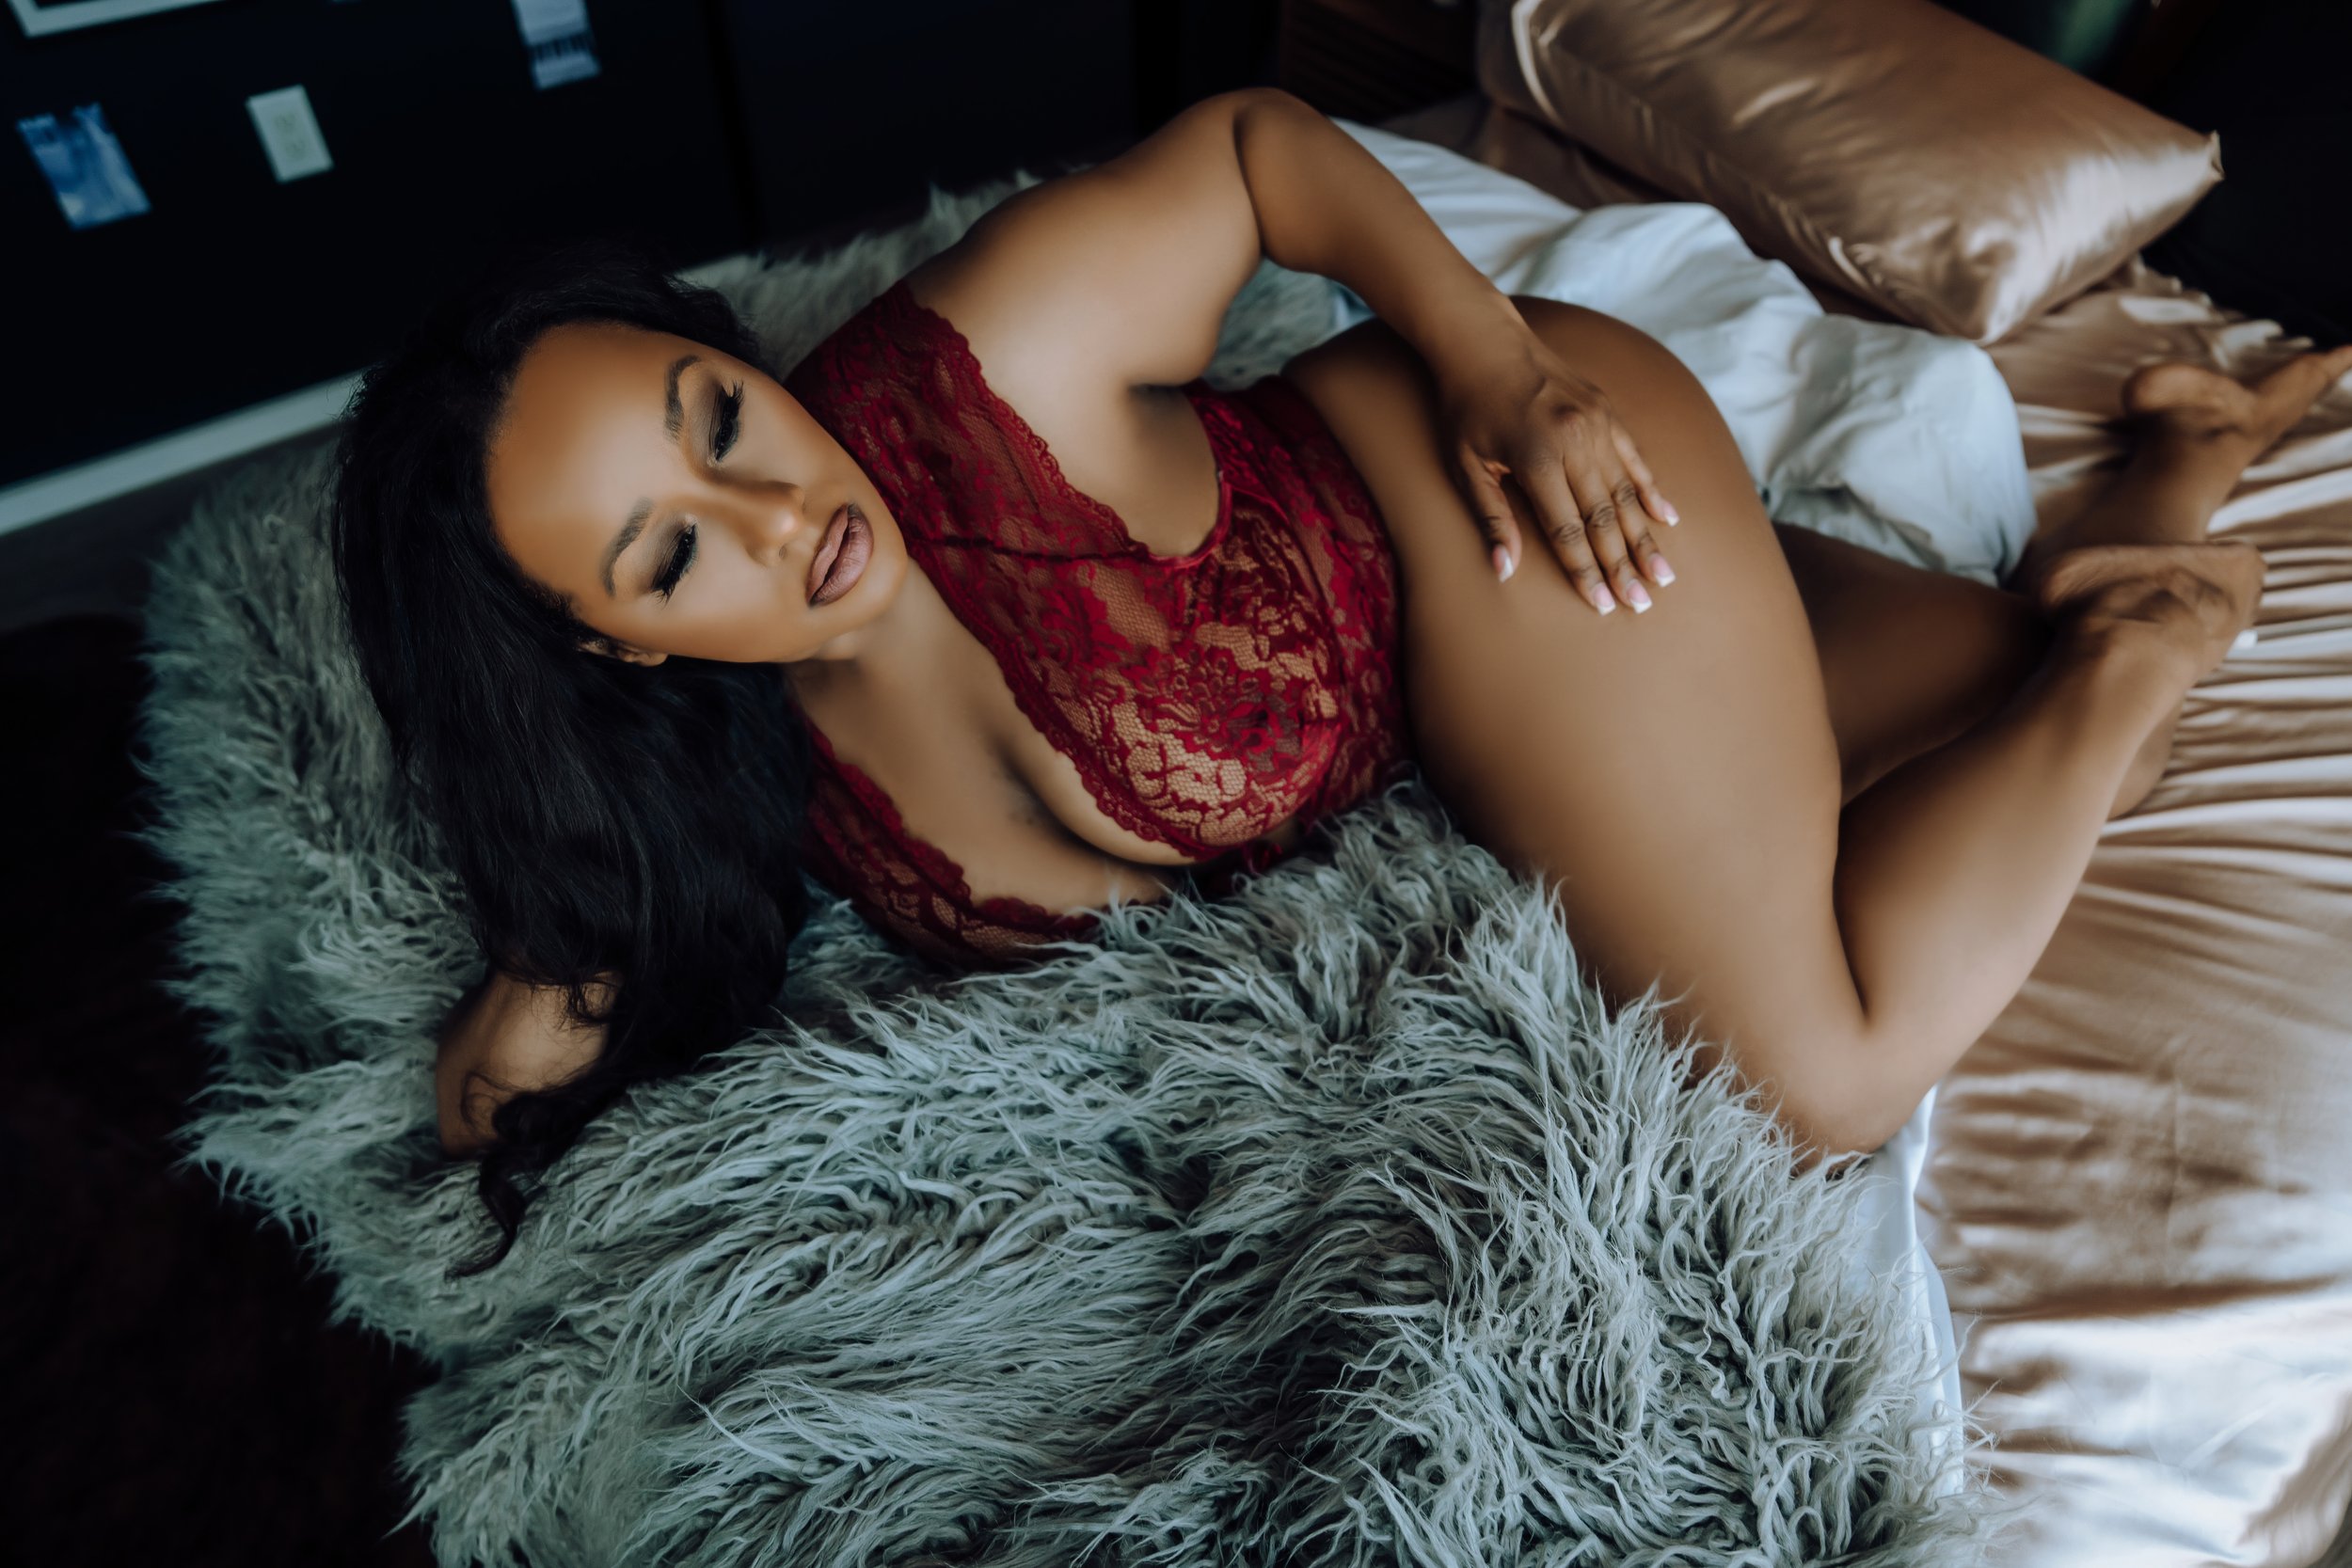 Black woman wearing burgandy lace teddy, woman of color over 40, lying on a bed, plus size boudoir photography, Holly Douglas and Company, Nashville, TN